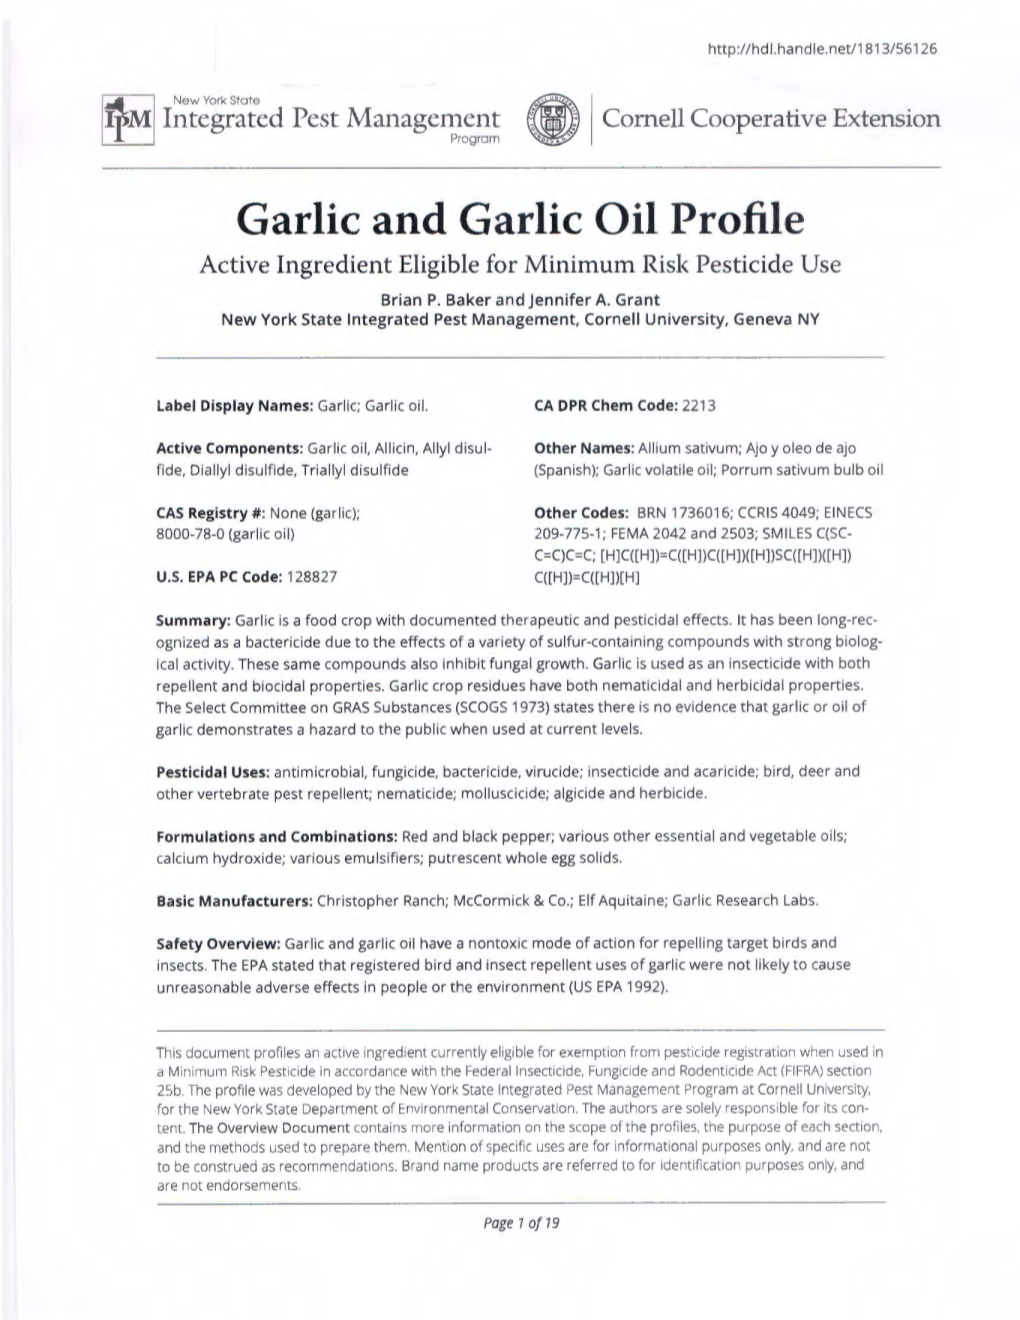 Garlic and Garlic Oil Profile Active Ingredient Eligible for Minimum Risk Pesticide Use